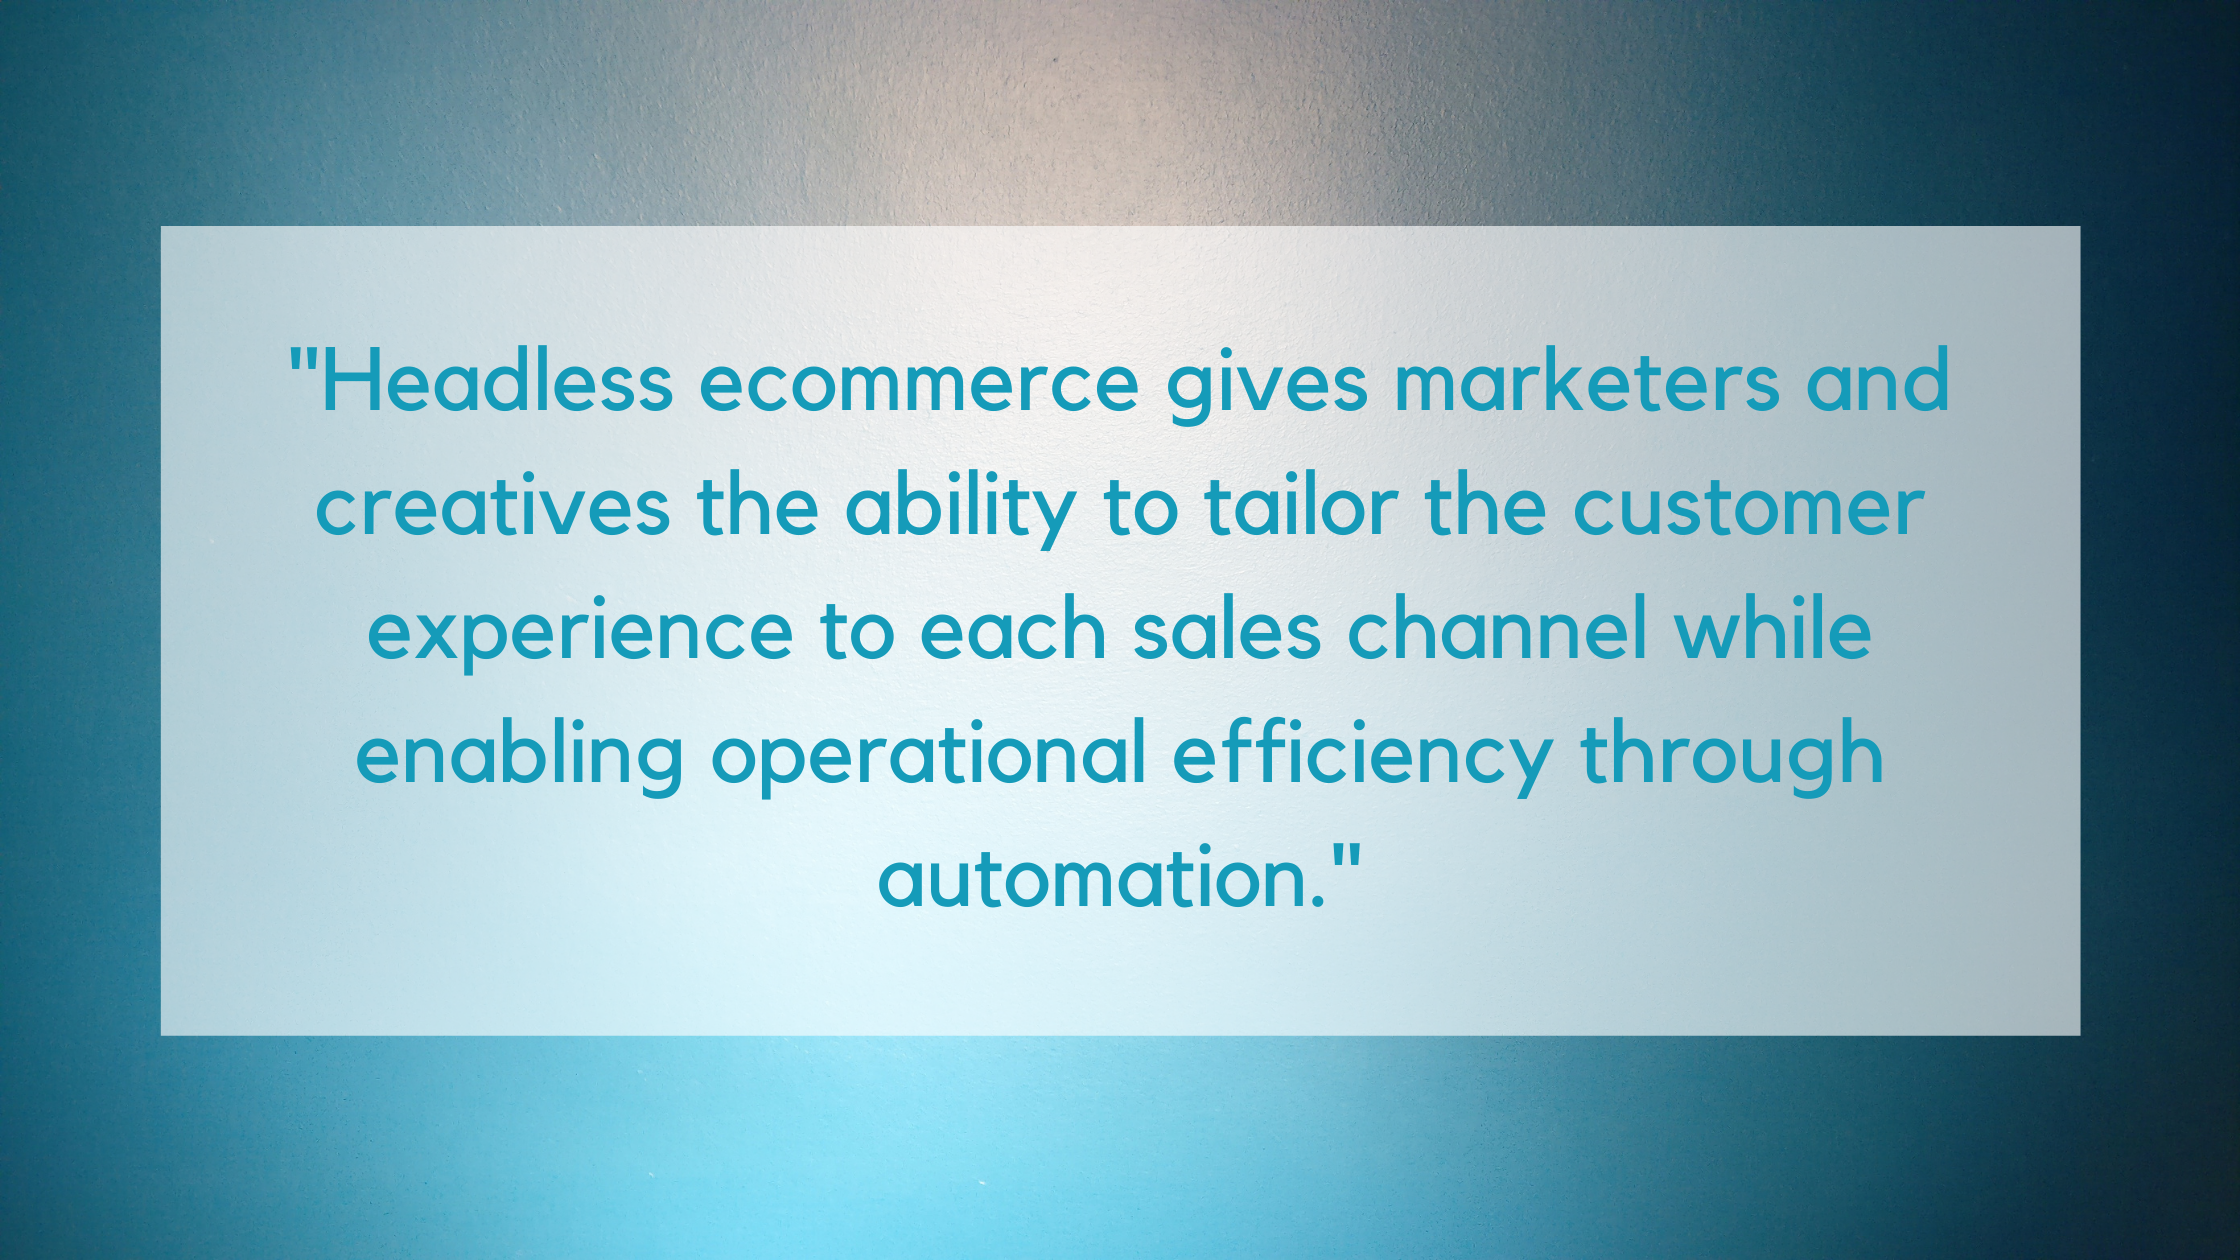 Headless ecommerce gives marketers and creatives the ability to tailor the customer experience to each sales channel while enabling operational efficiency through automation. (1)